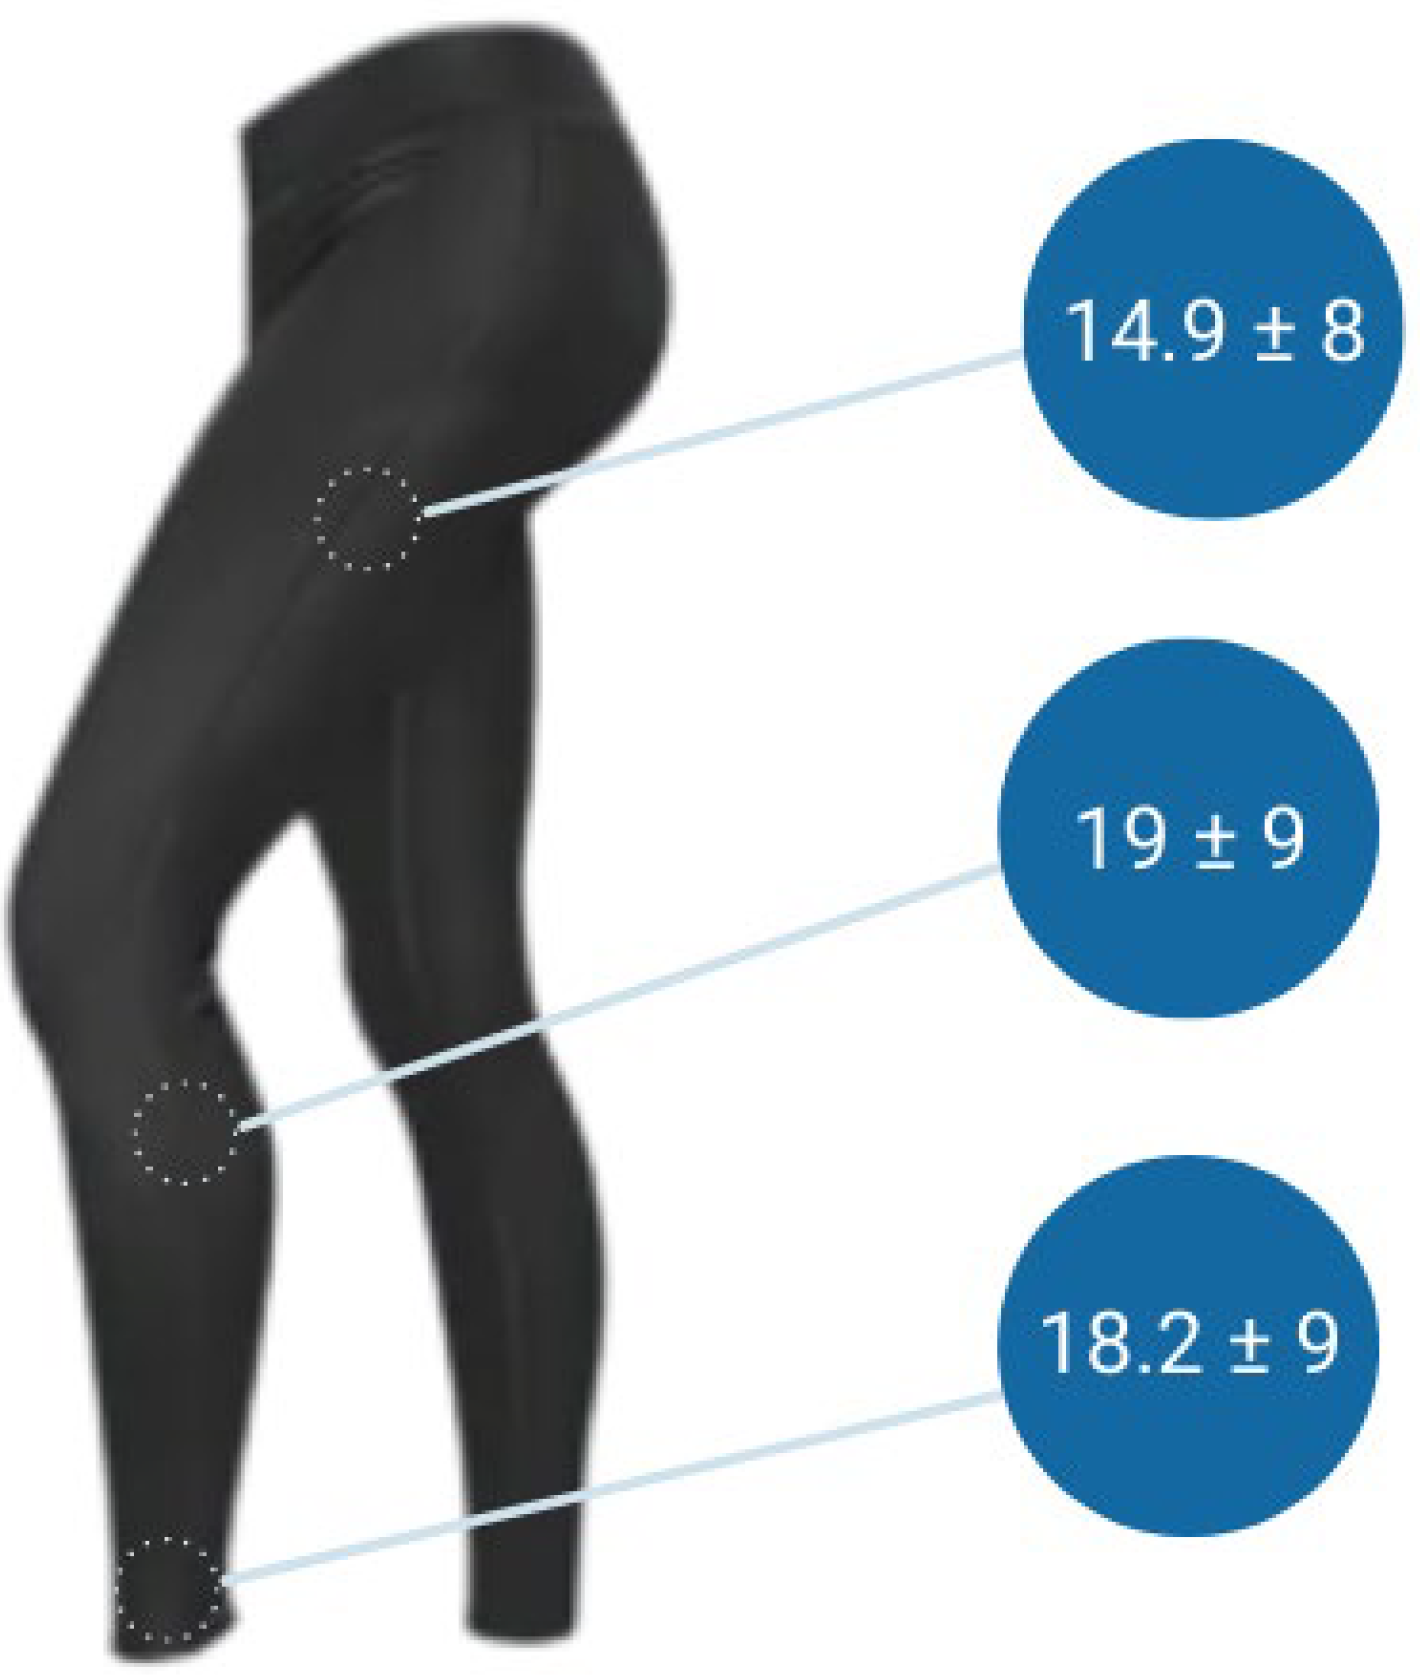 Share 166+ benefits of compression leggings